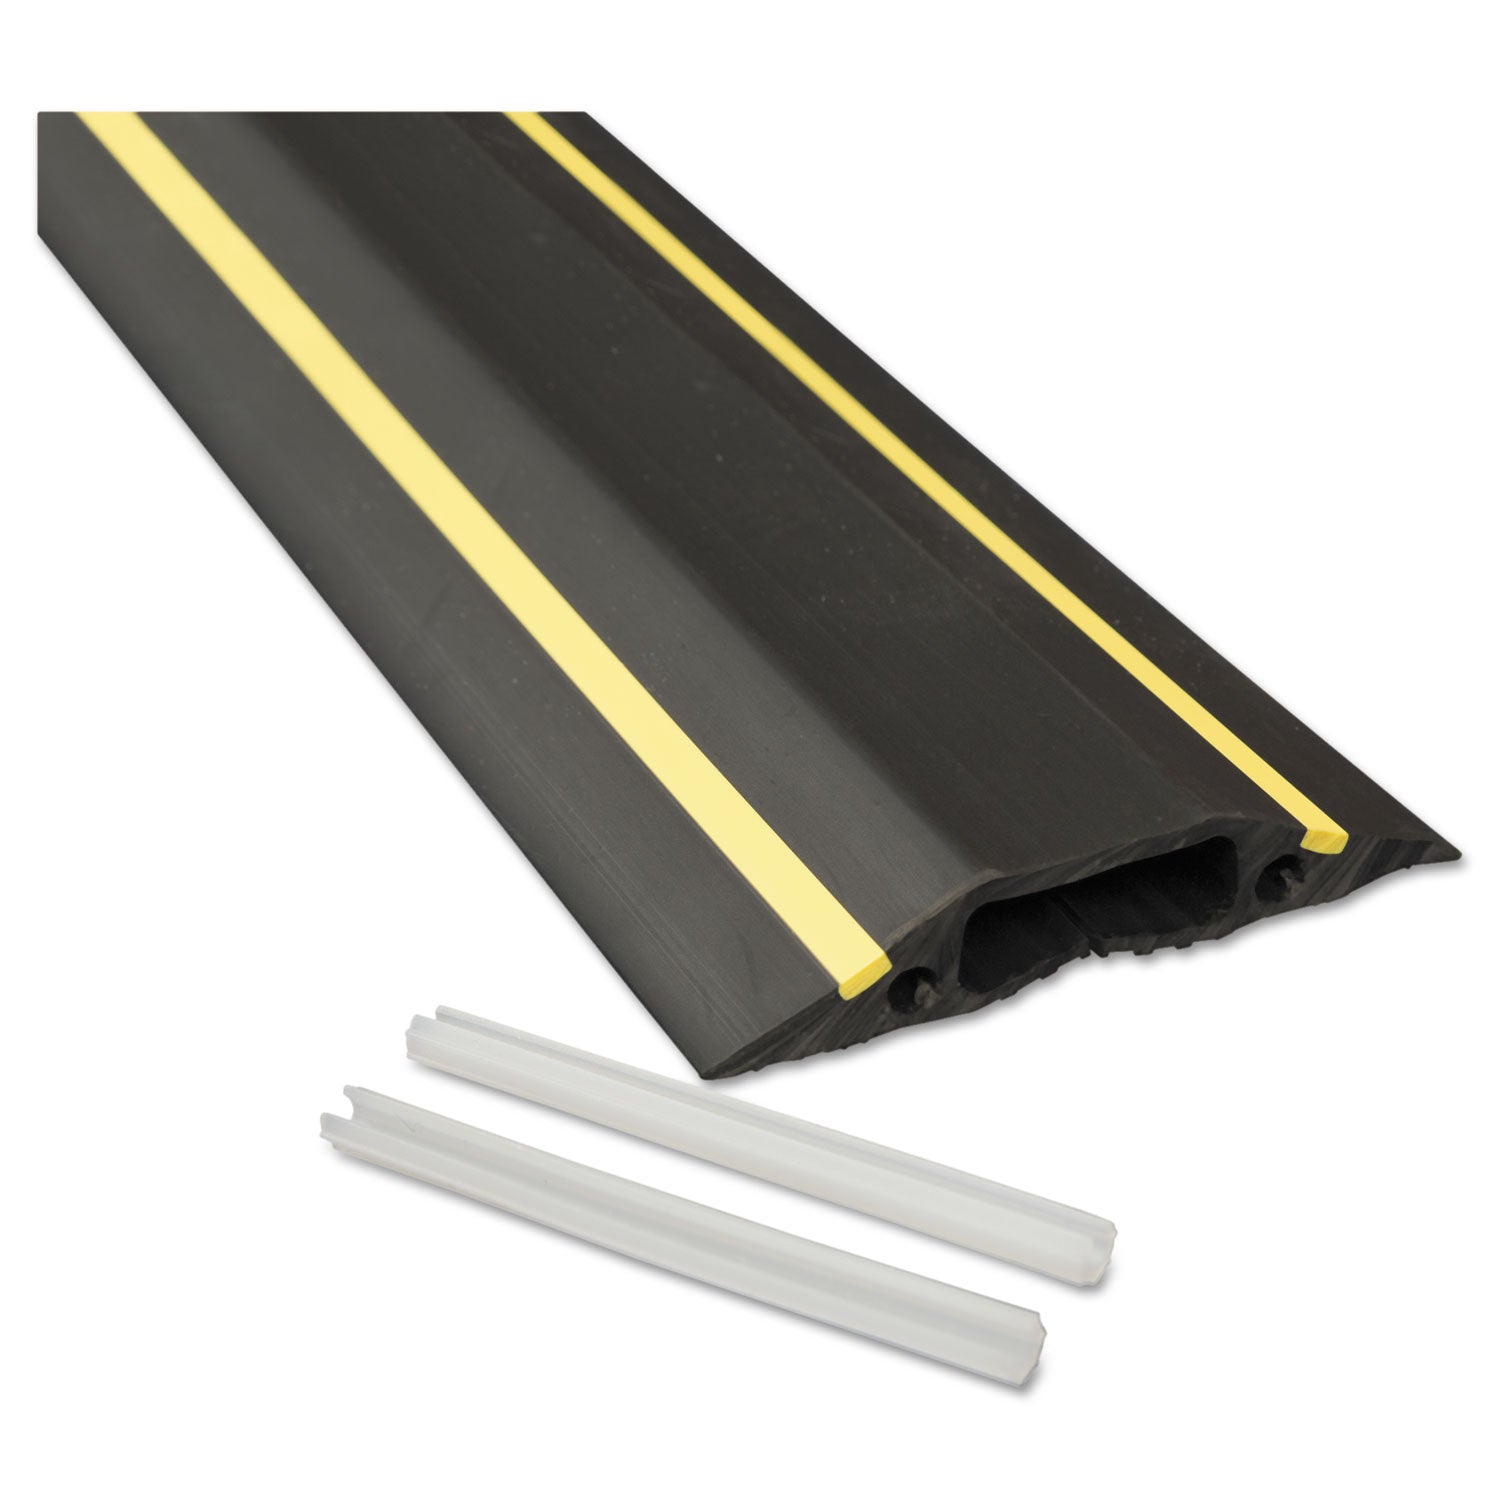 Medium-Duty Floor Cable Cover, 3.25 x 0.5 x 6 ft, Black with Yellow Stripe - 